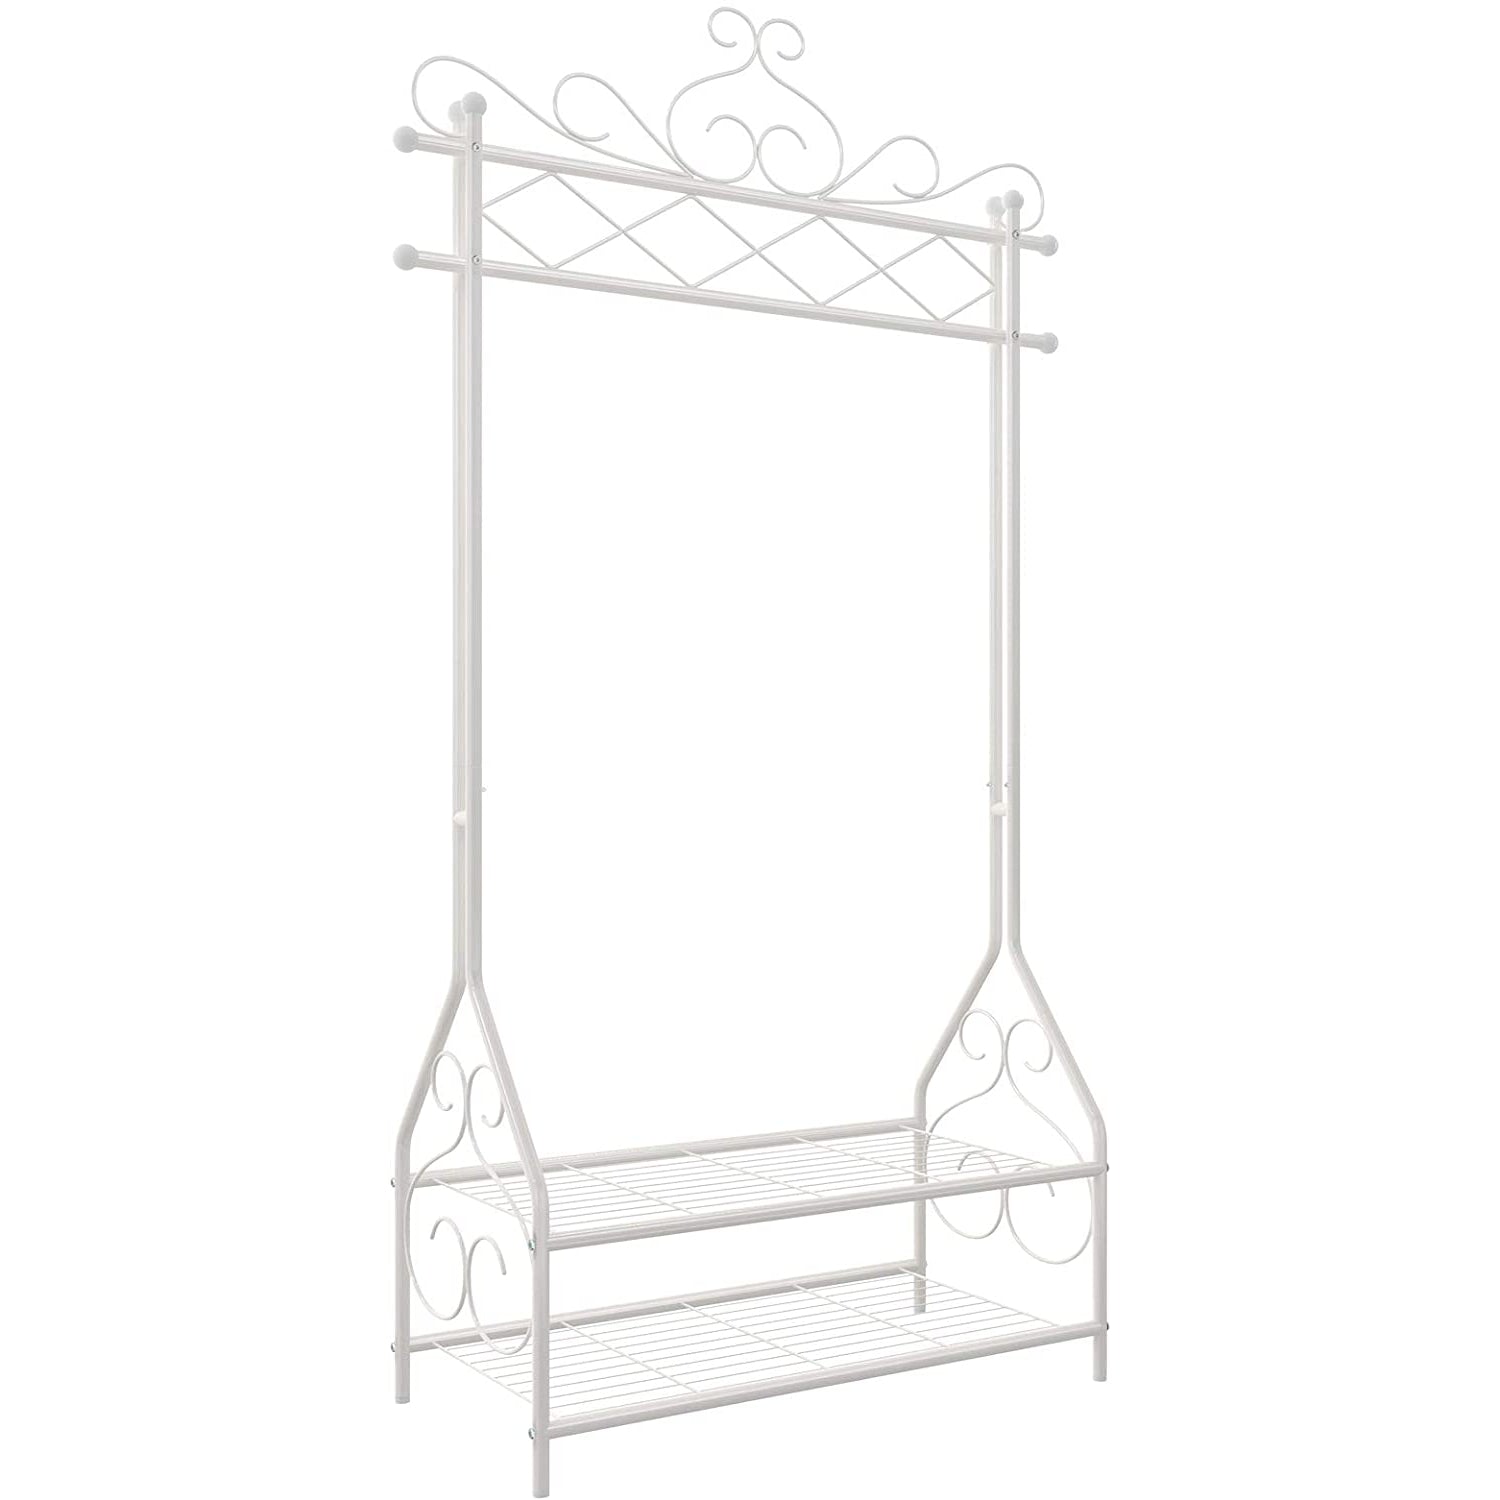 Nancy's Vintage Clothes Rack - Clothing Racks - Rack with Clothes Rail and 2 Shelves